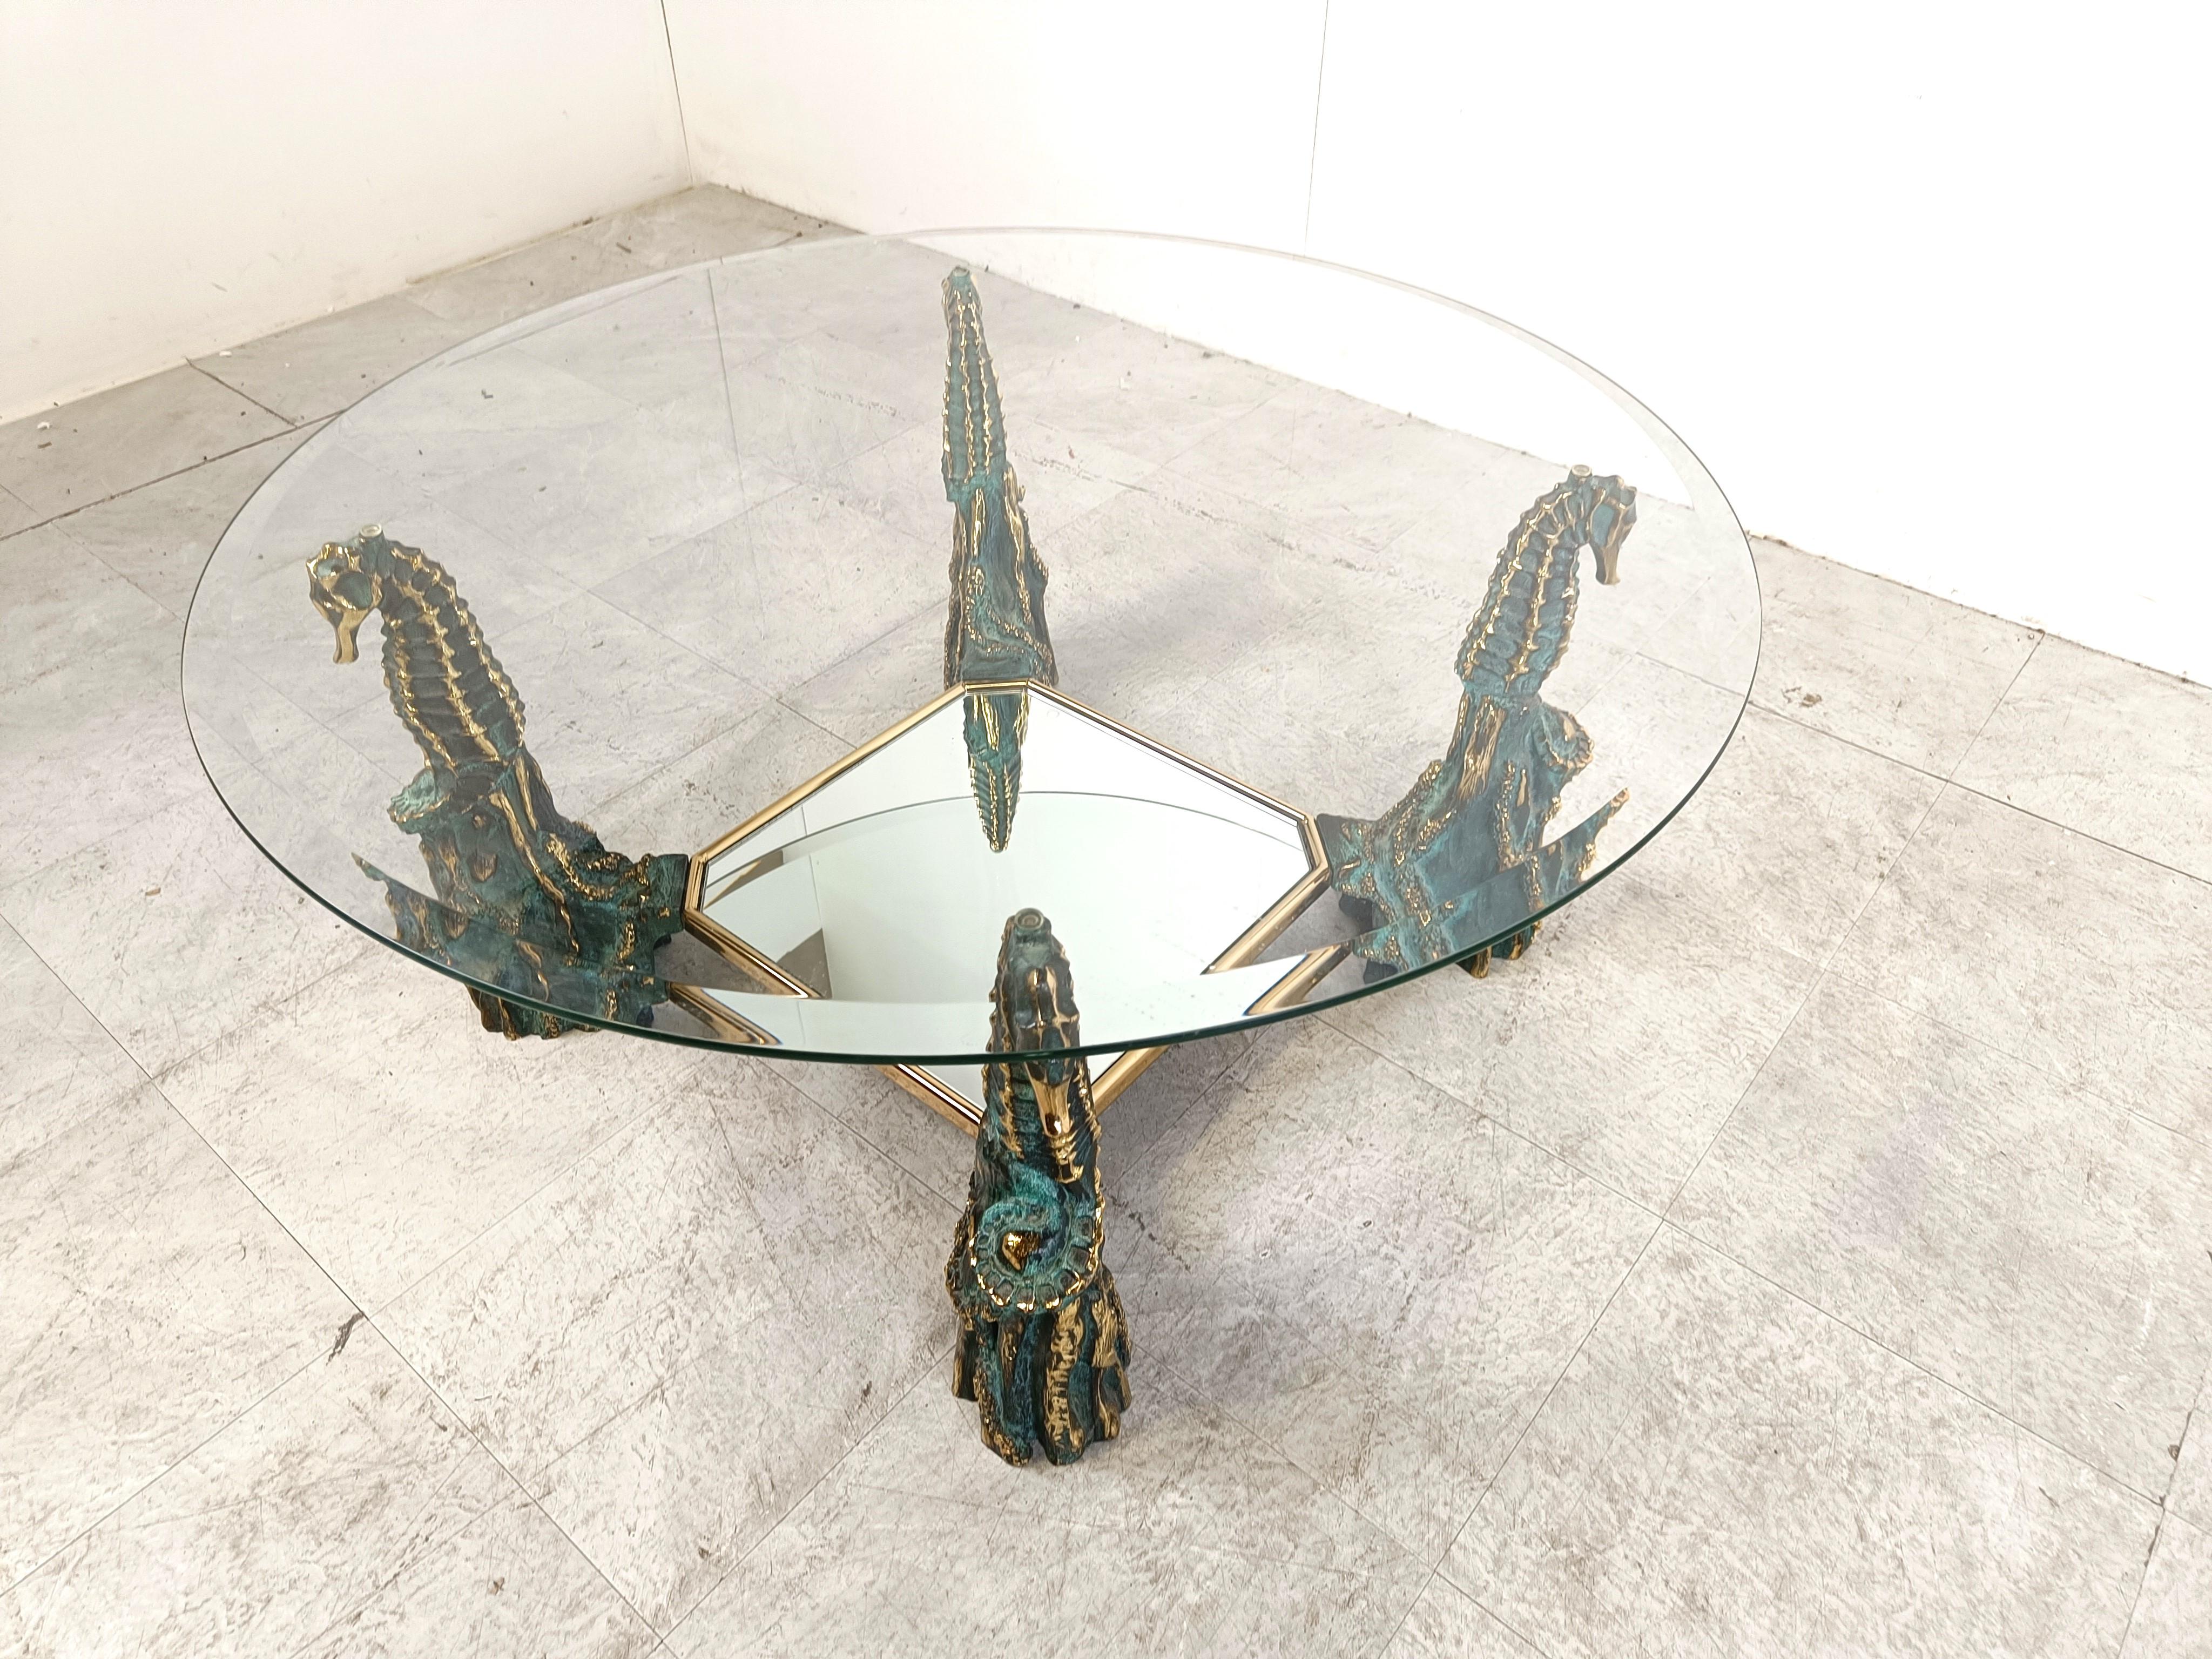 Sculptural brass bronzed seahorse figure coffee table with a round clear glass top and a mirrored glass lower shelf.

In the style of Maison Jansen

Made in Belgium in the 1960s 

Good condition

Height: 42cm/16.53